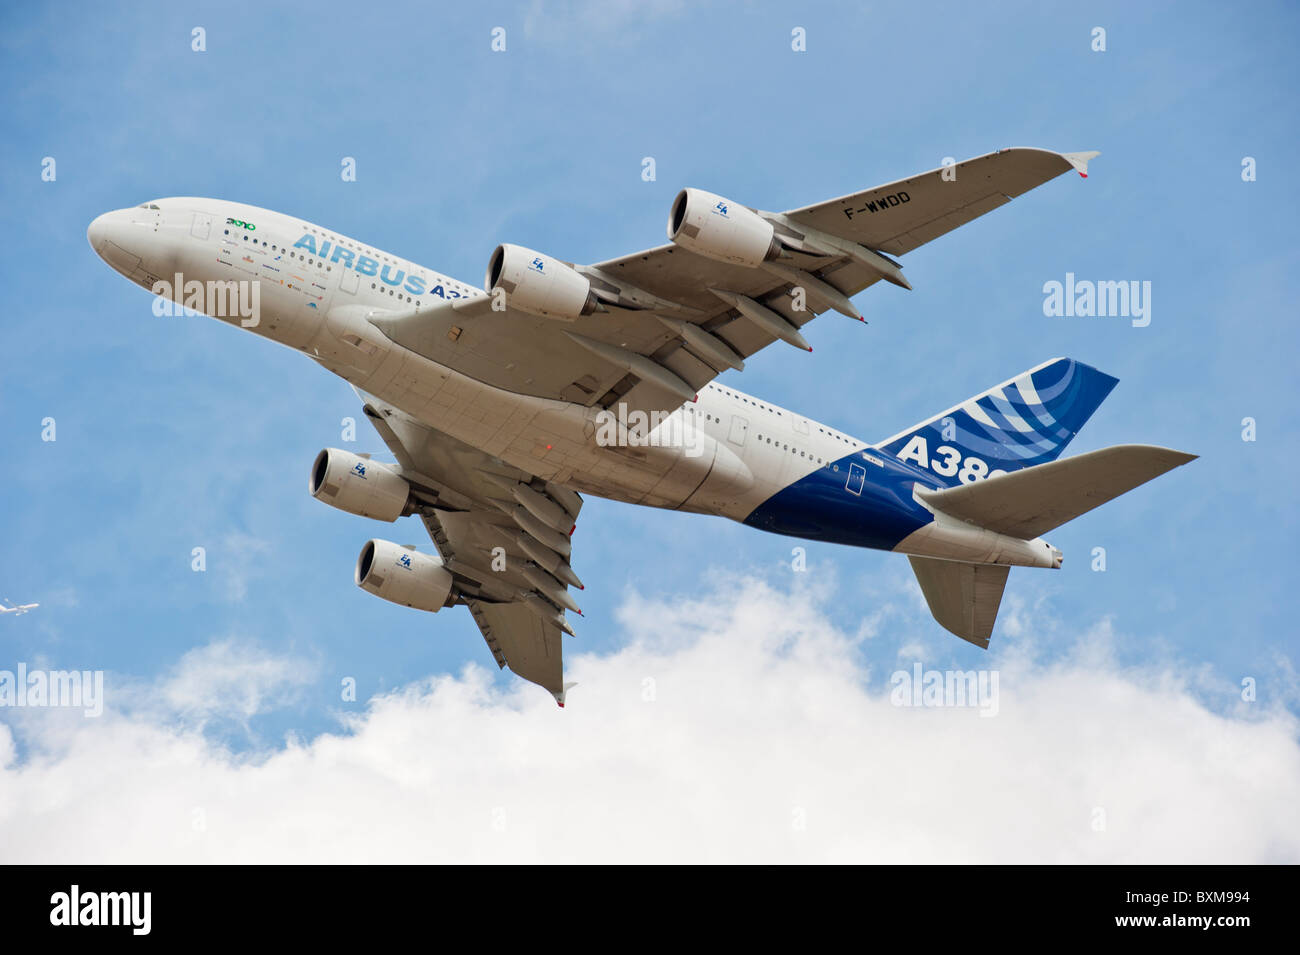 Airbus A380, the largest passenger airliner in the world. Stock Photo